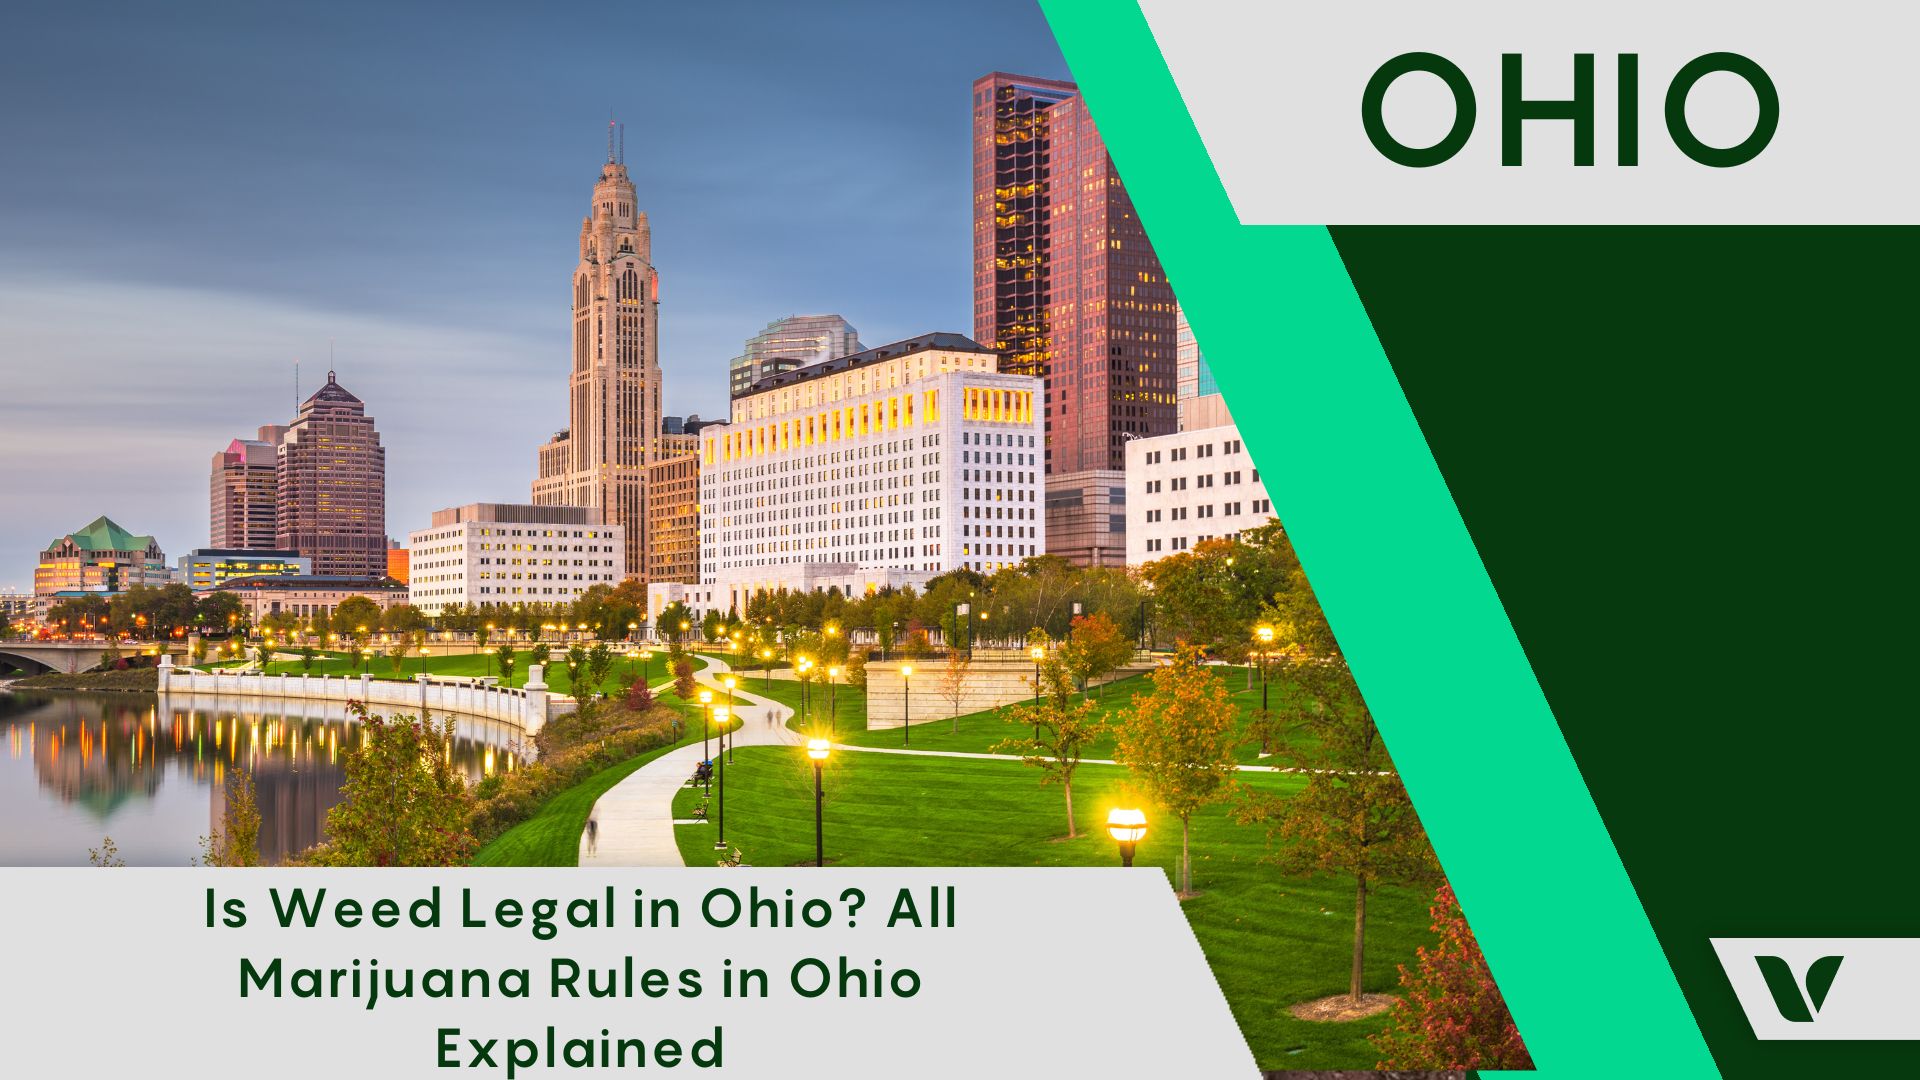 Is Weed Legal in Ohio? All Marijuana Rules in Ohio Explained